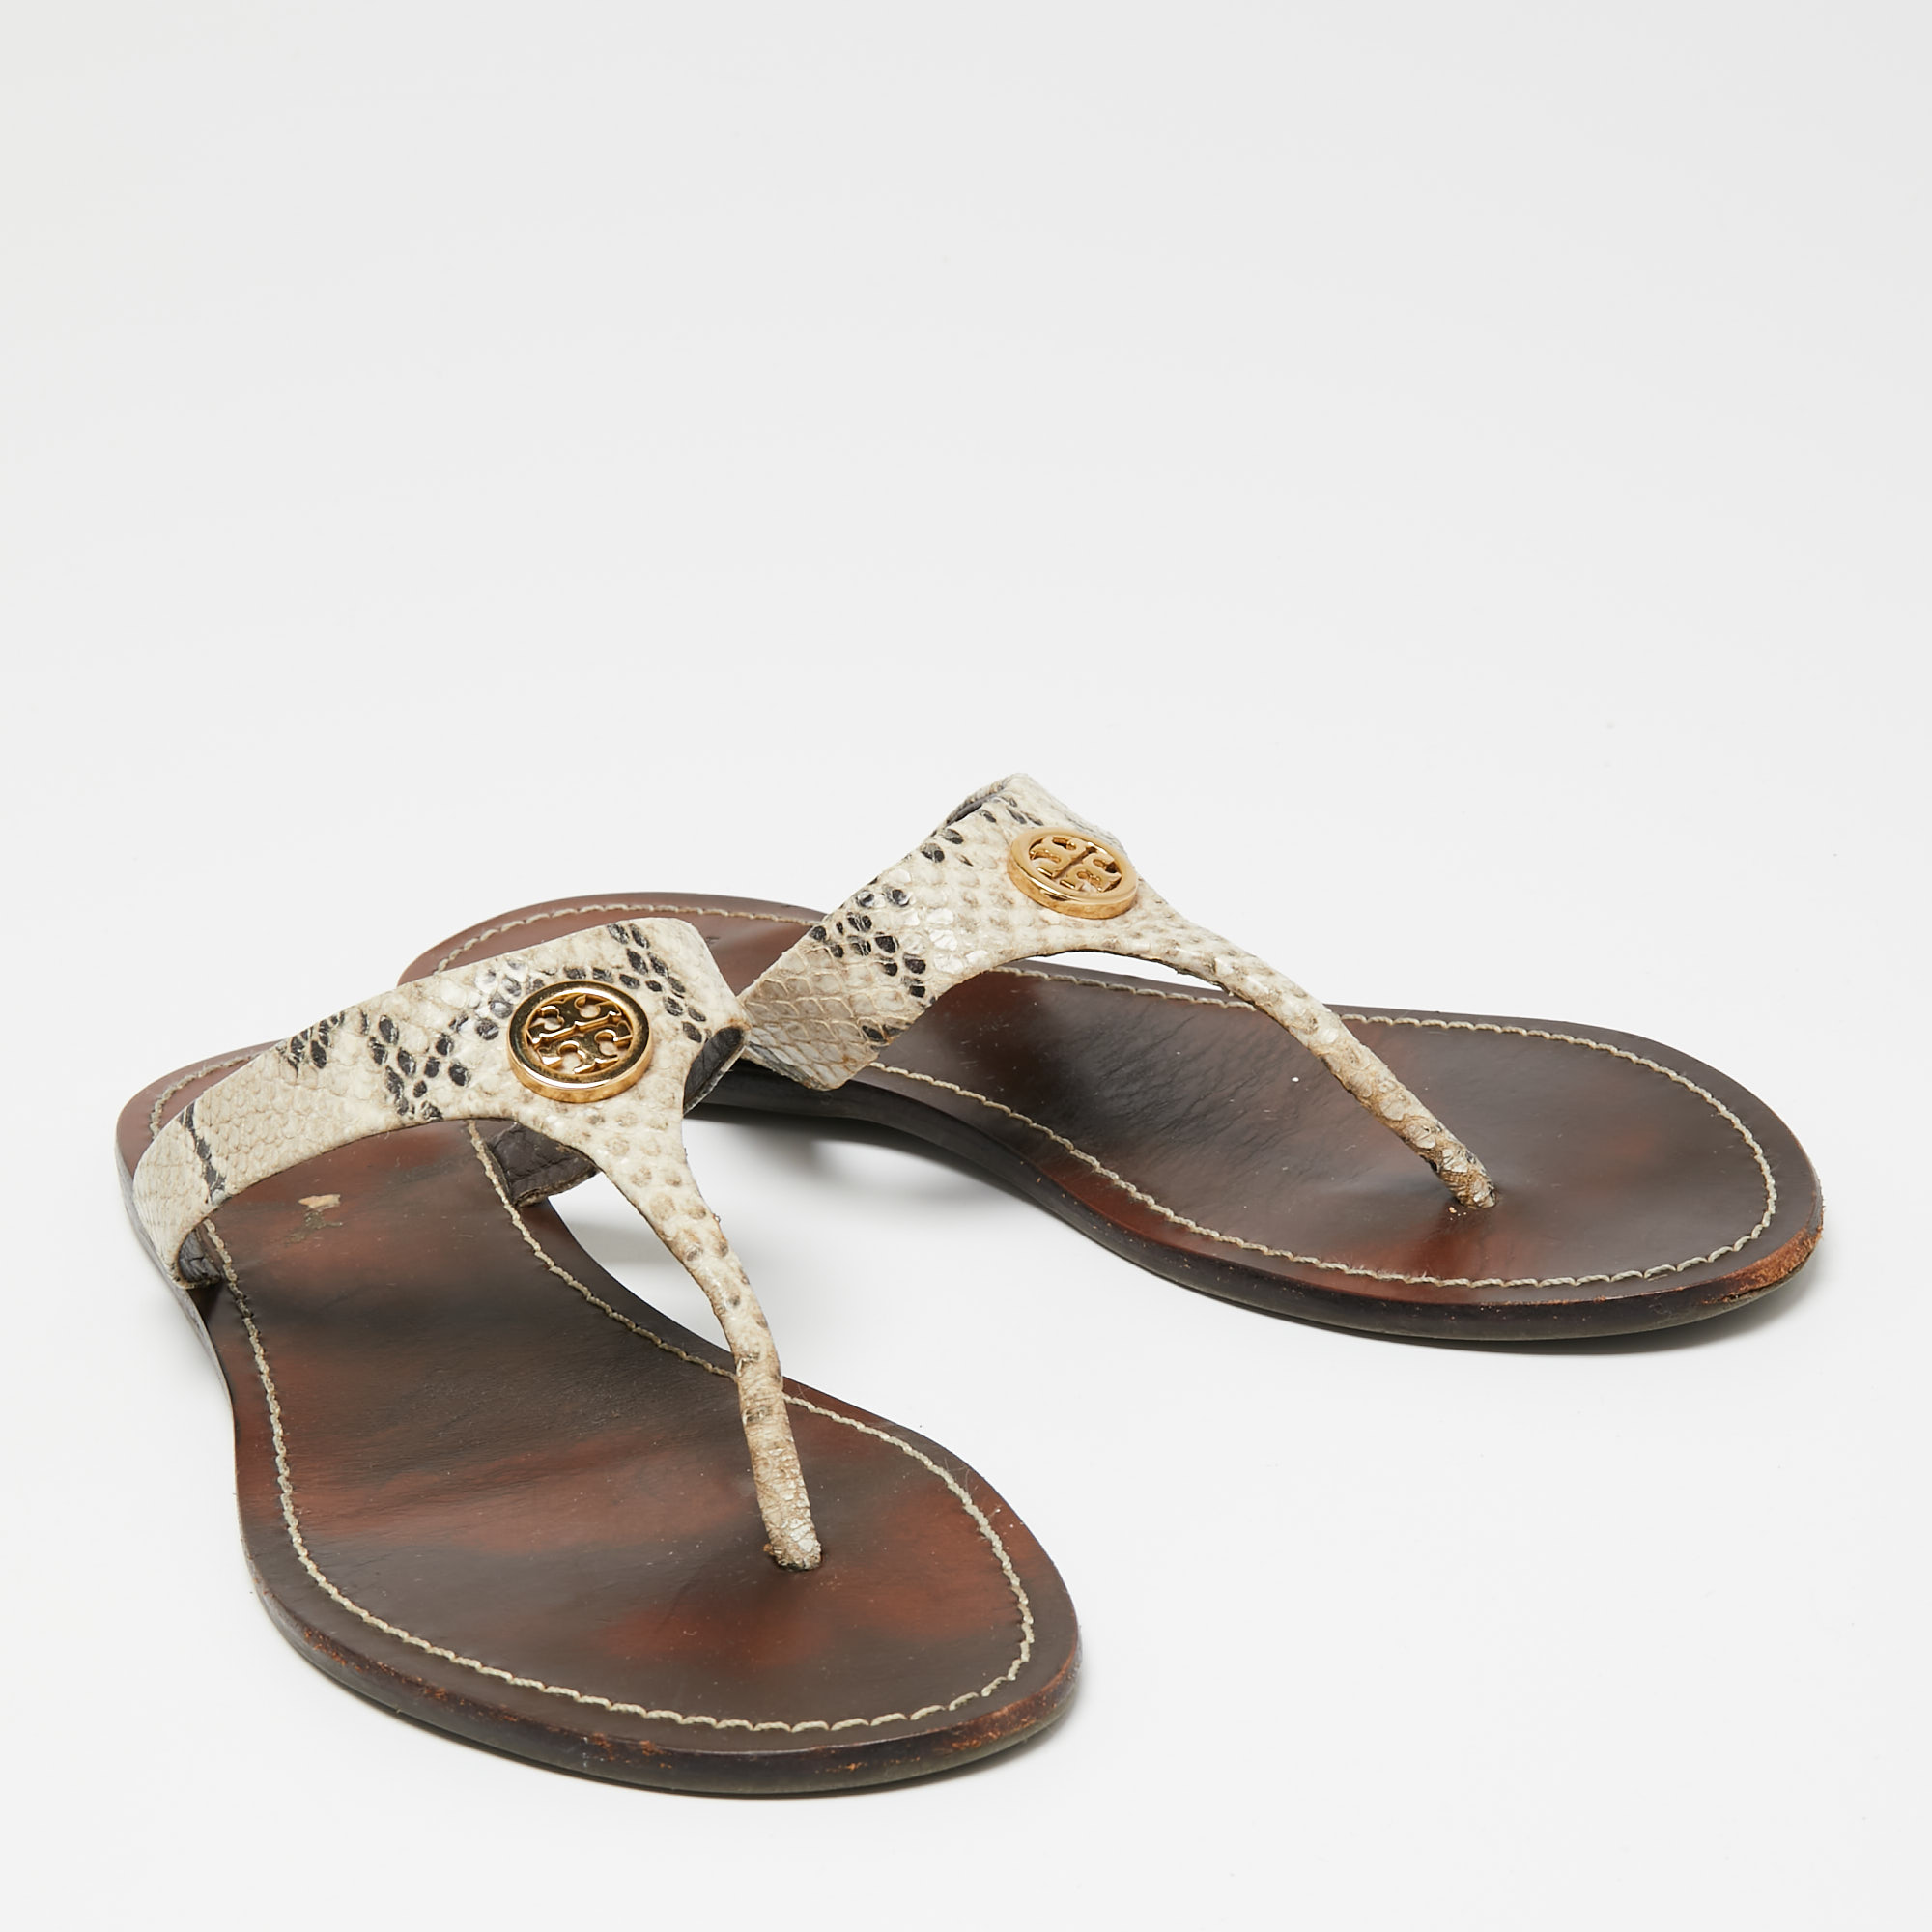 Tory Burch Beige/Black Snakeskin Embossed Leather Flat Thong Sandals Size 38.5